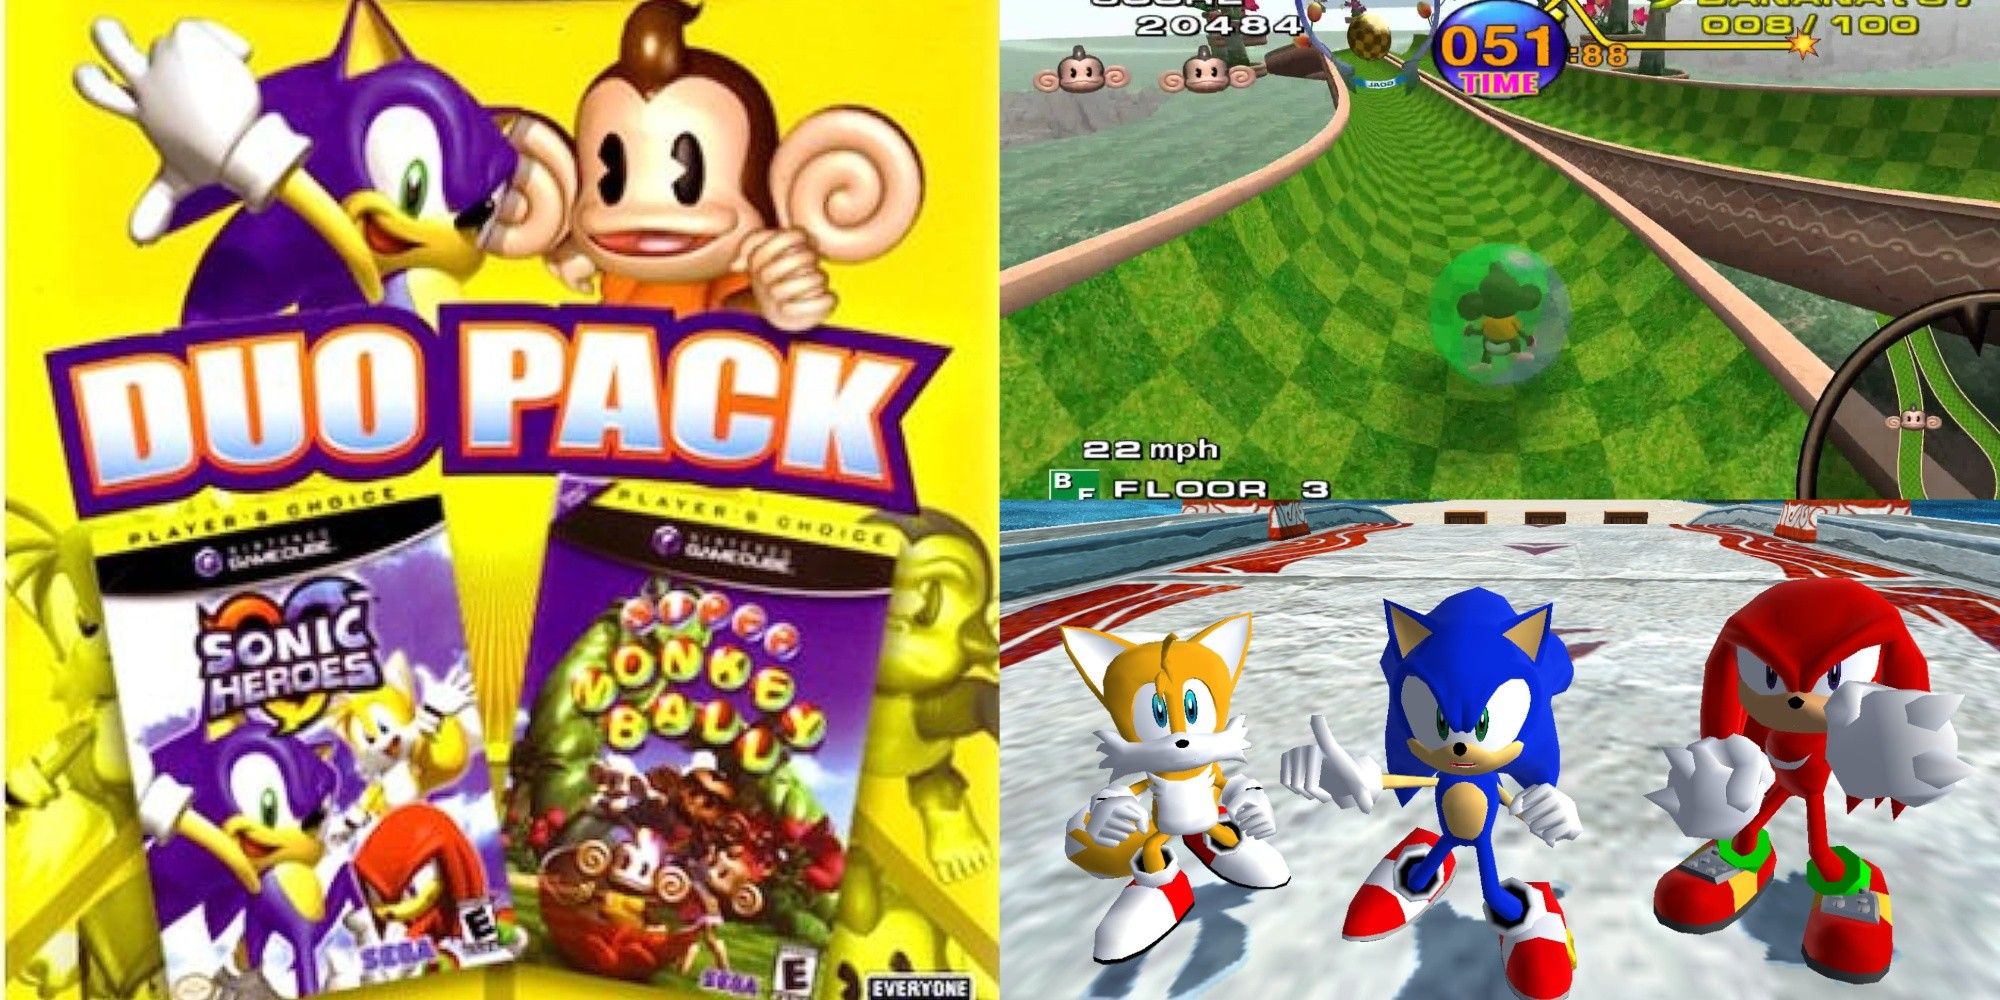 super monkey ball sonic heroes duo pack most expensive gamecube games